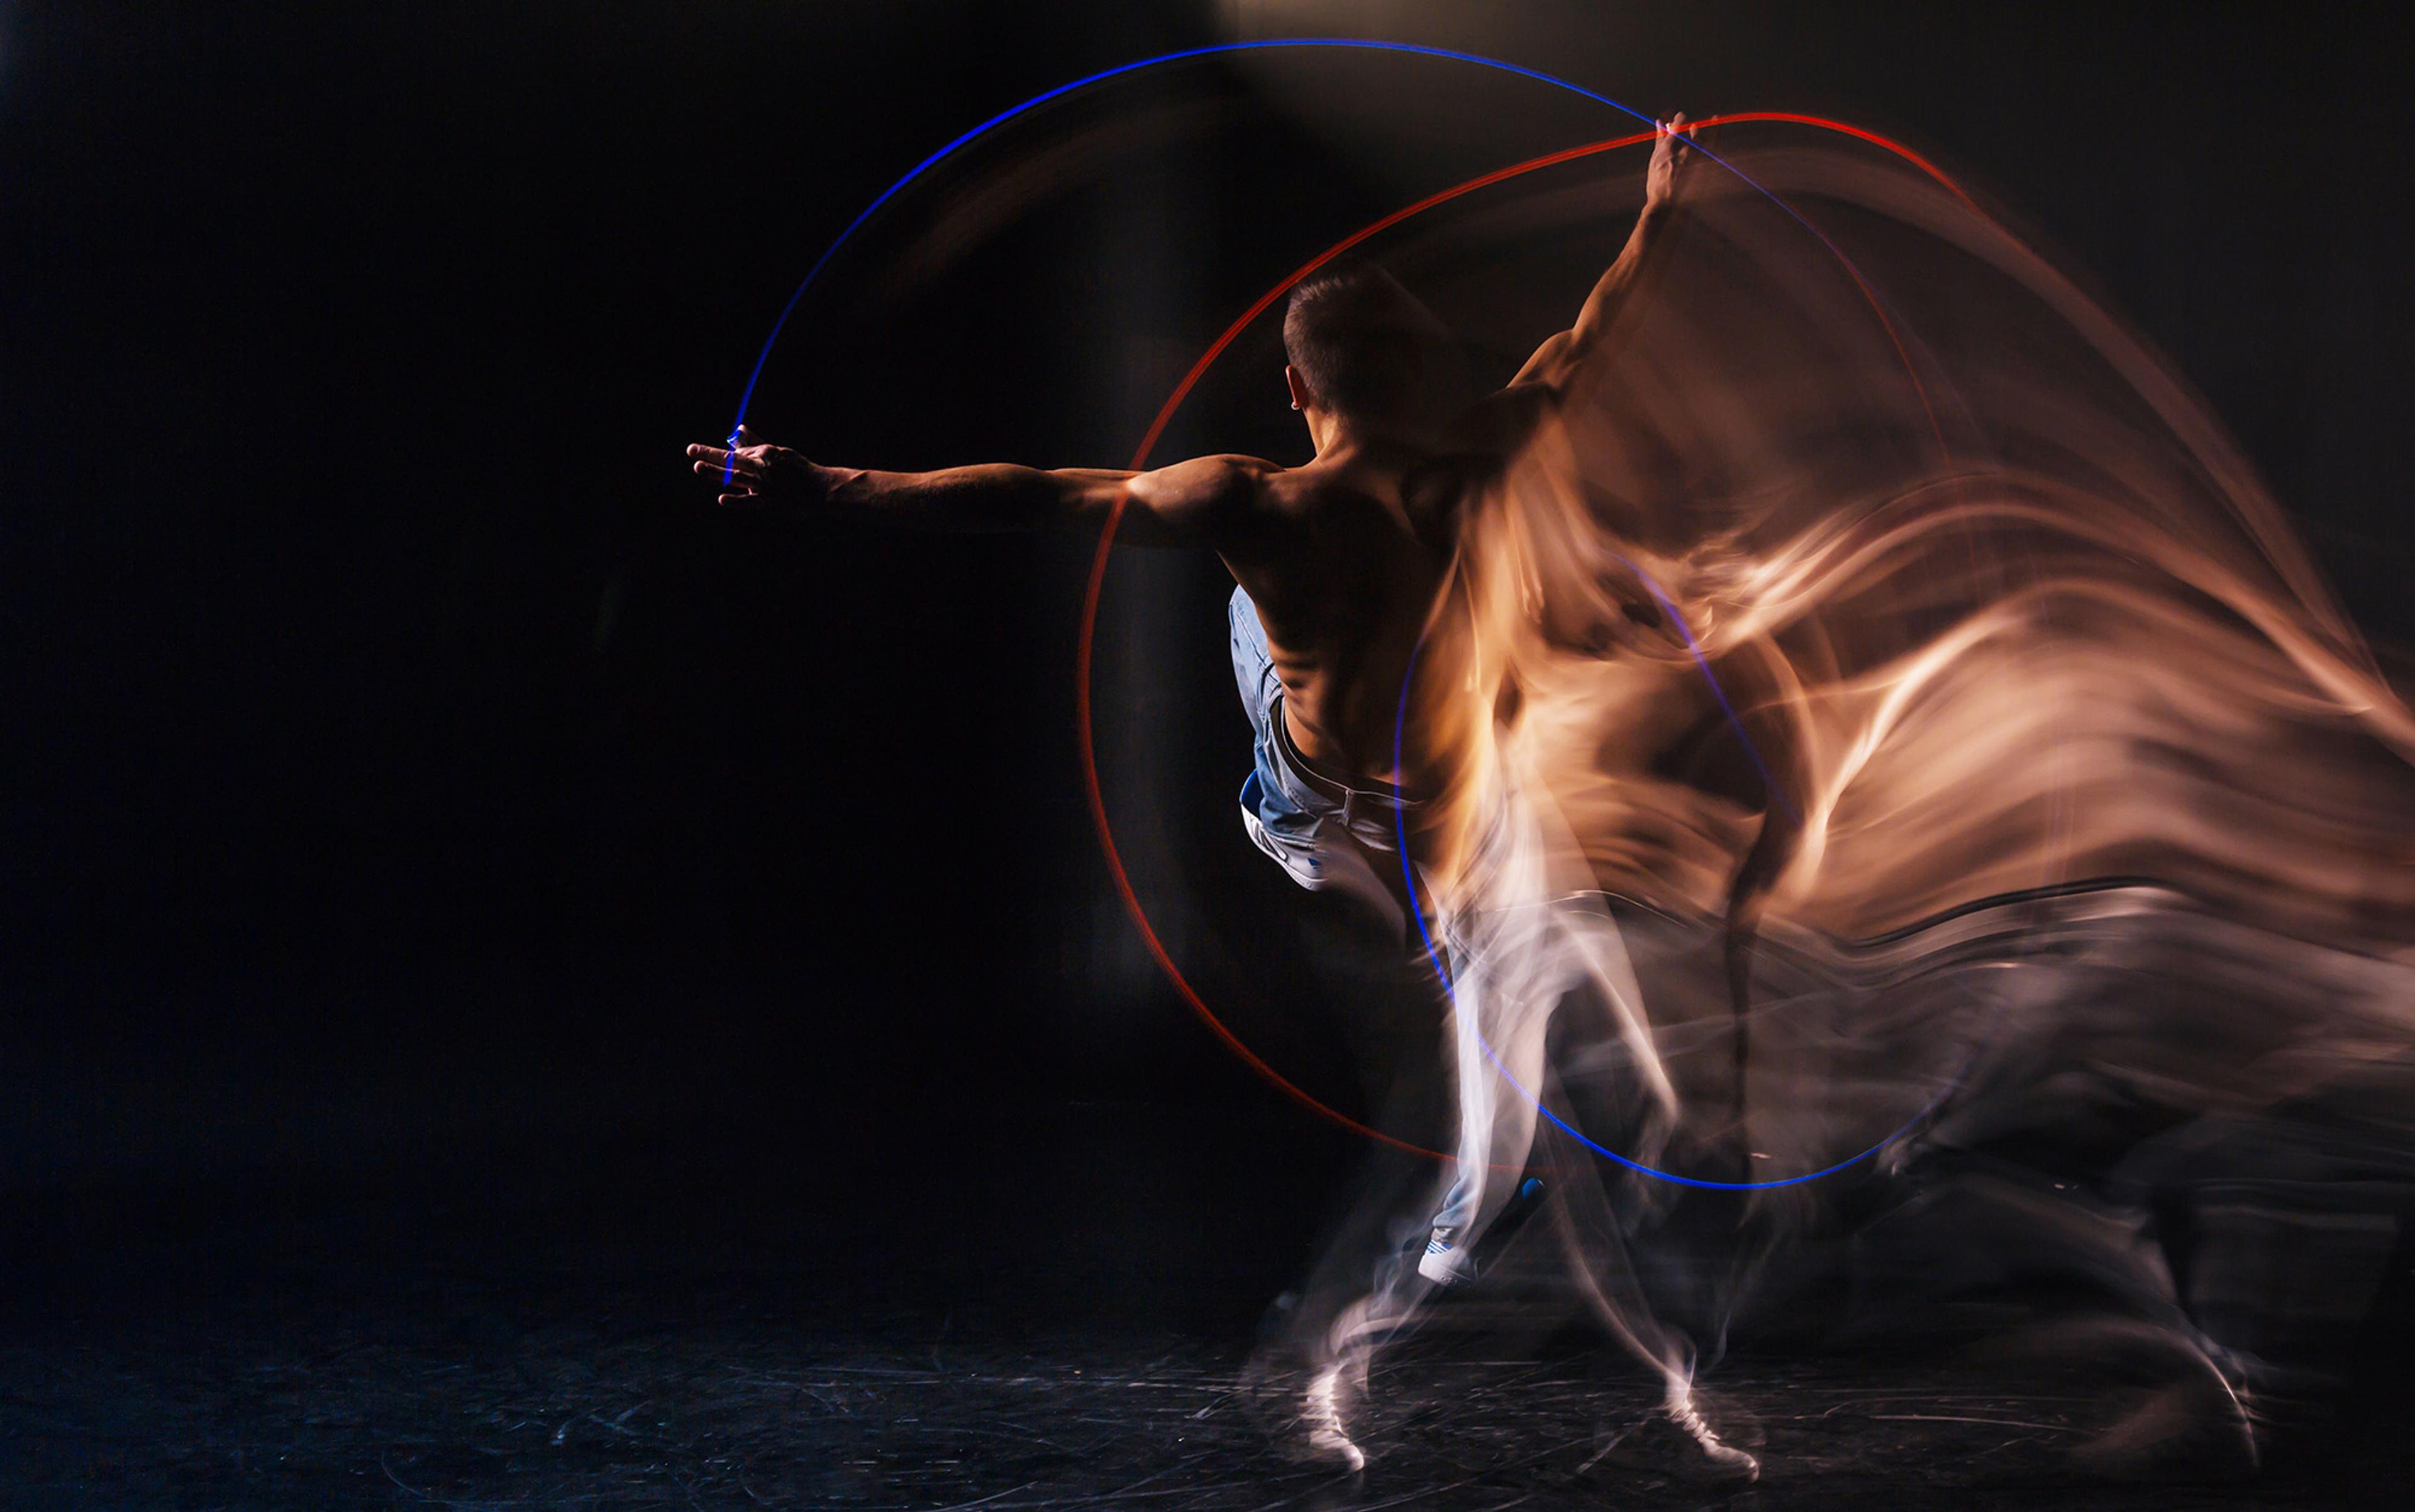 A double-exposure image of a dancer on stage against a black backdrop, his body is lit and partly shot in motion blur